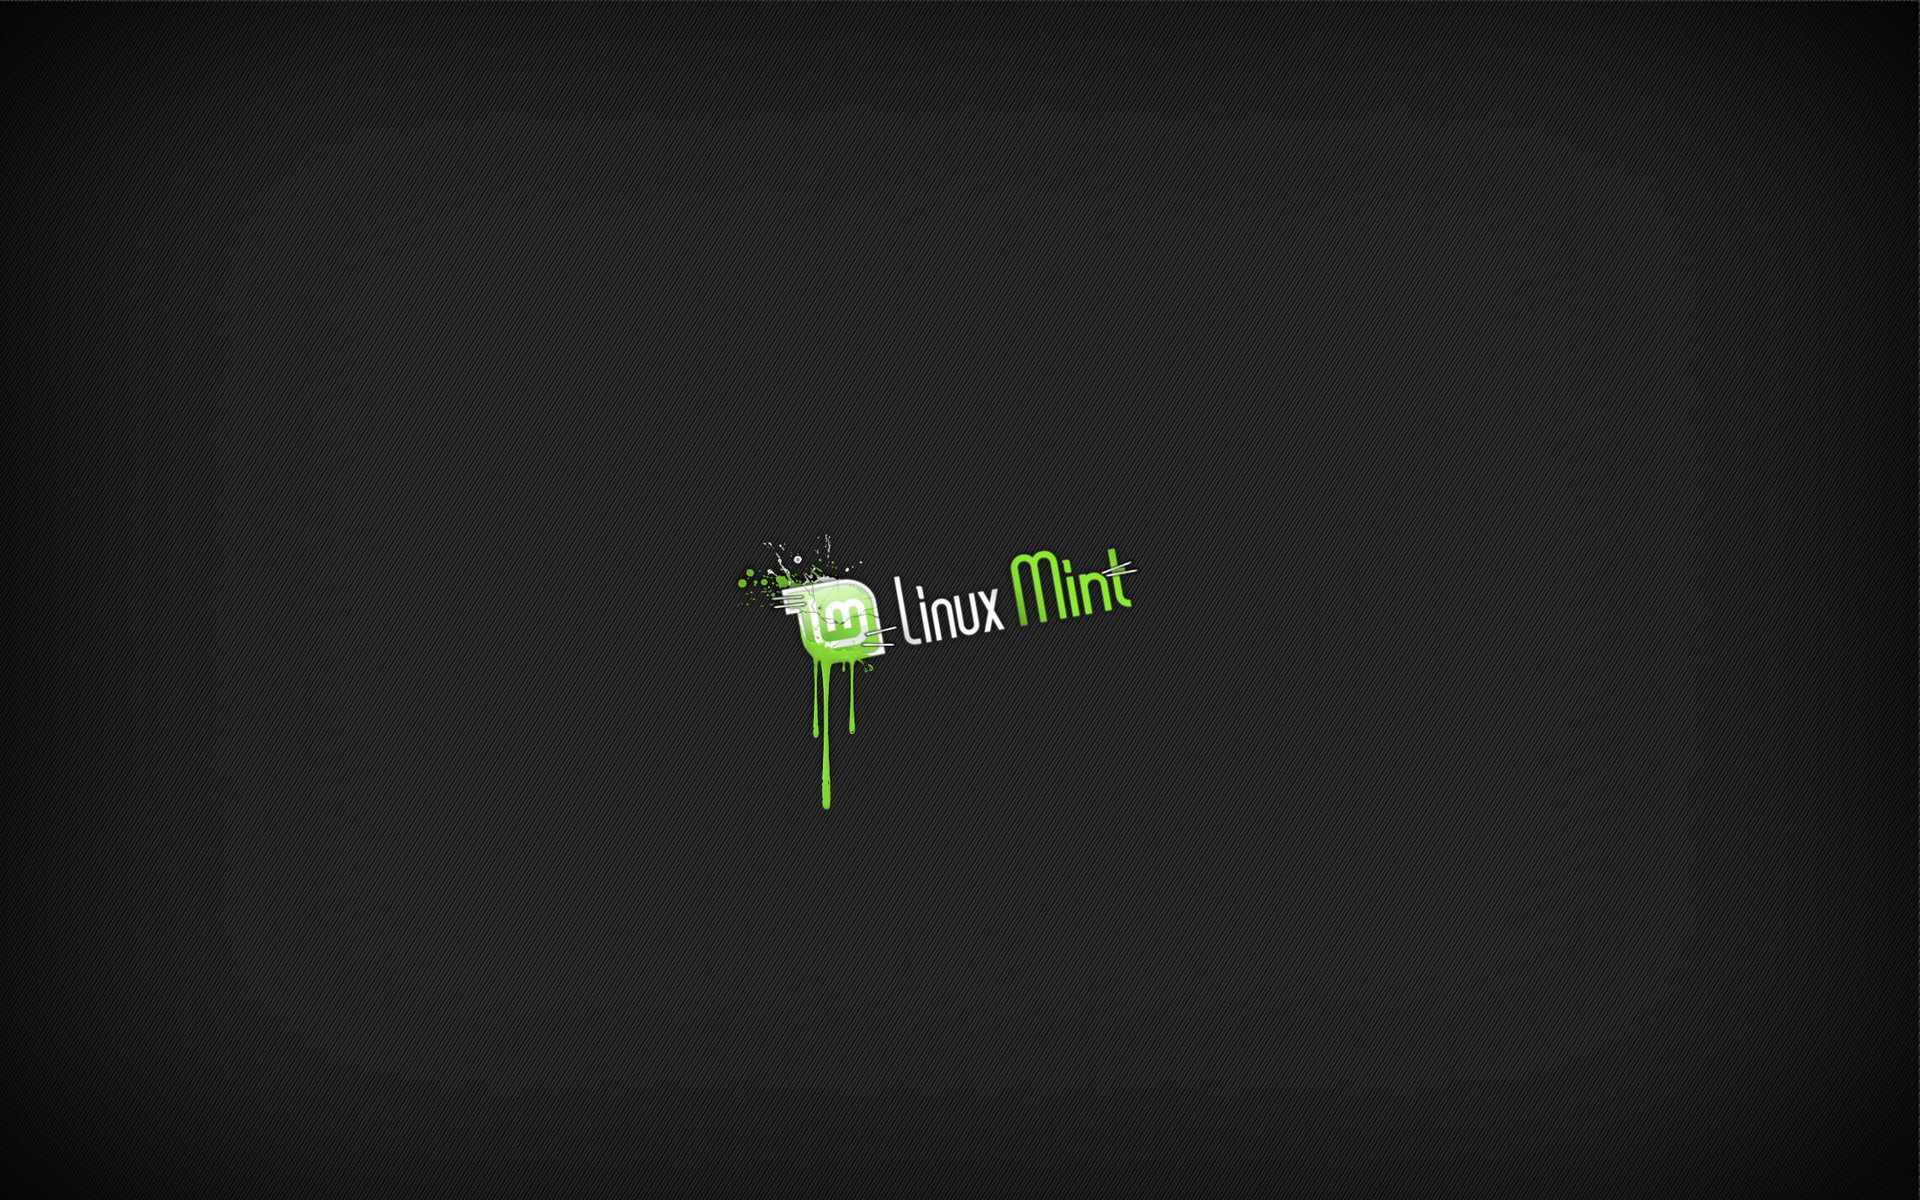 Wallpapers linux mint os logo on the desktop